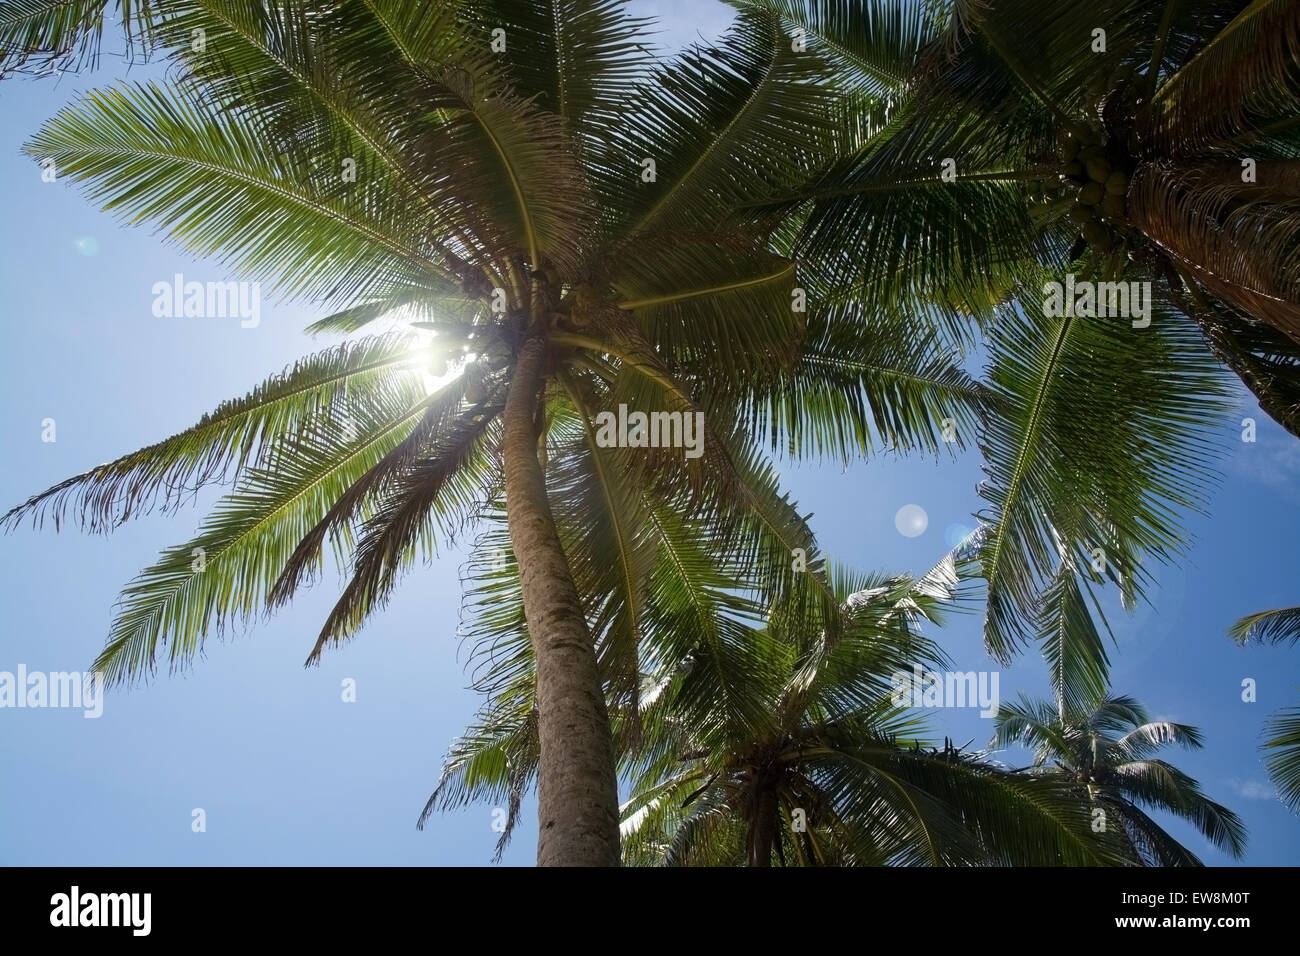 Coconut palm trees with fruit and solar flare, Southern Province, Sri Lanka, Asia. Stock Photo